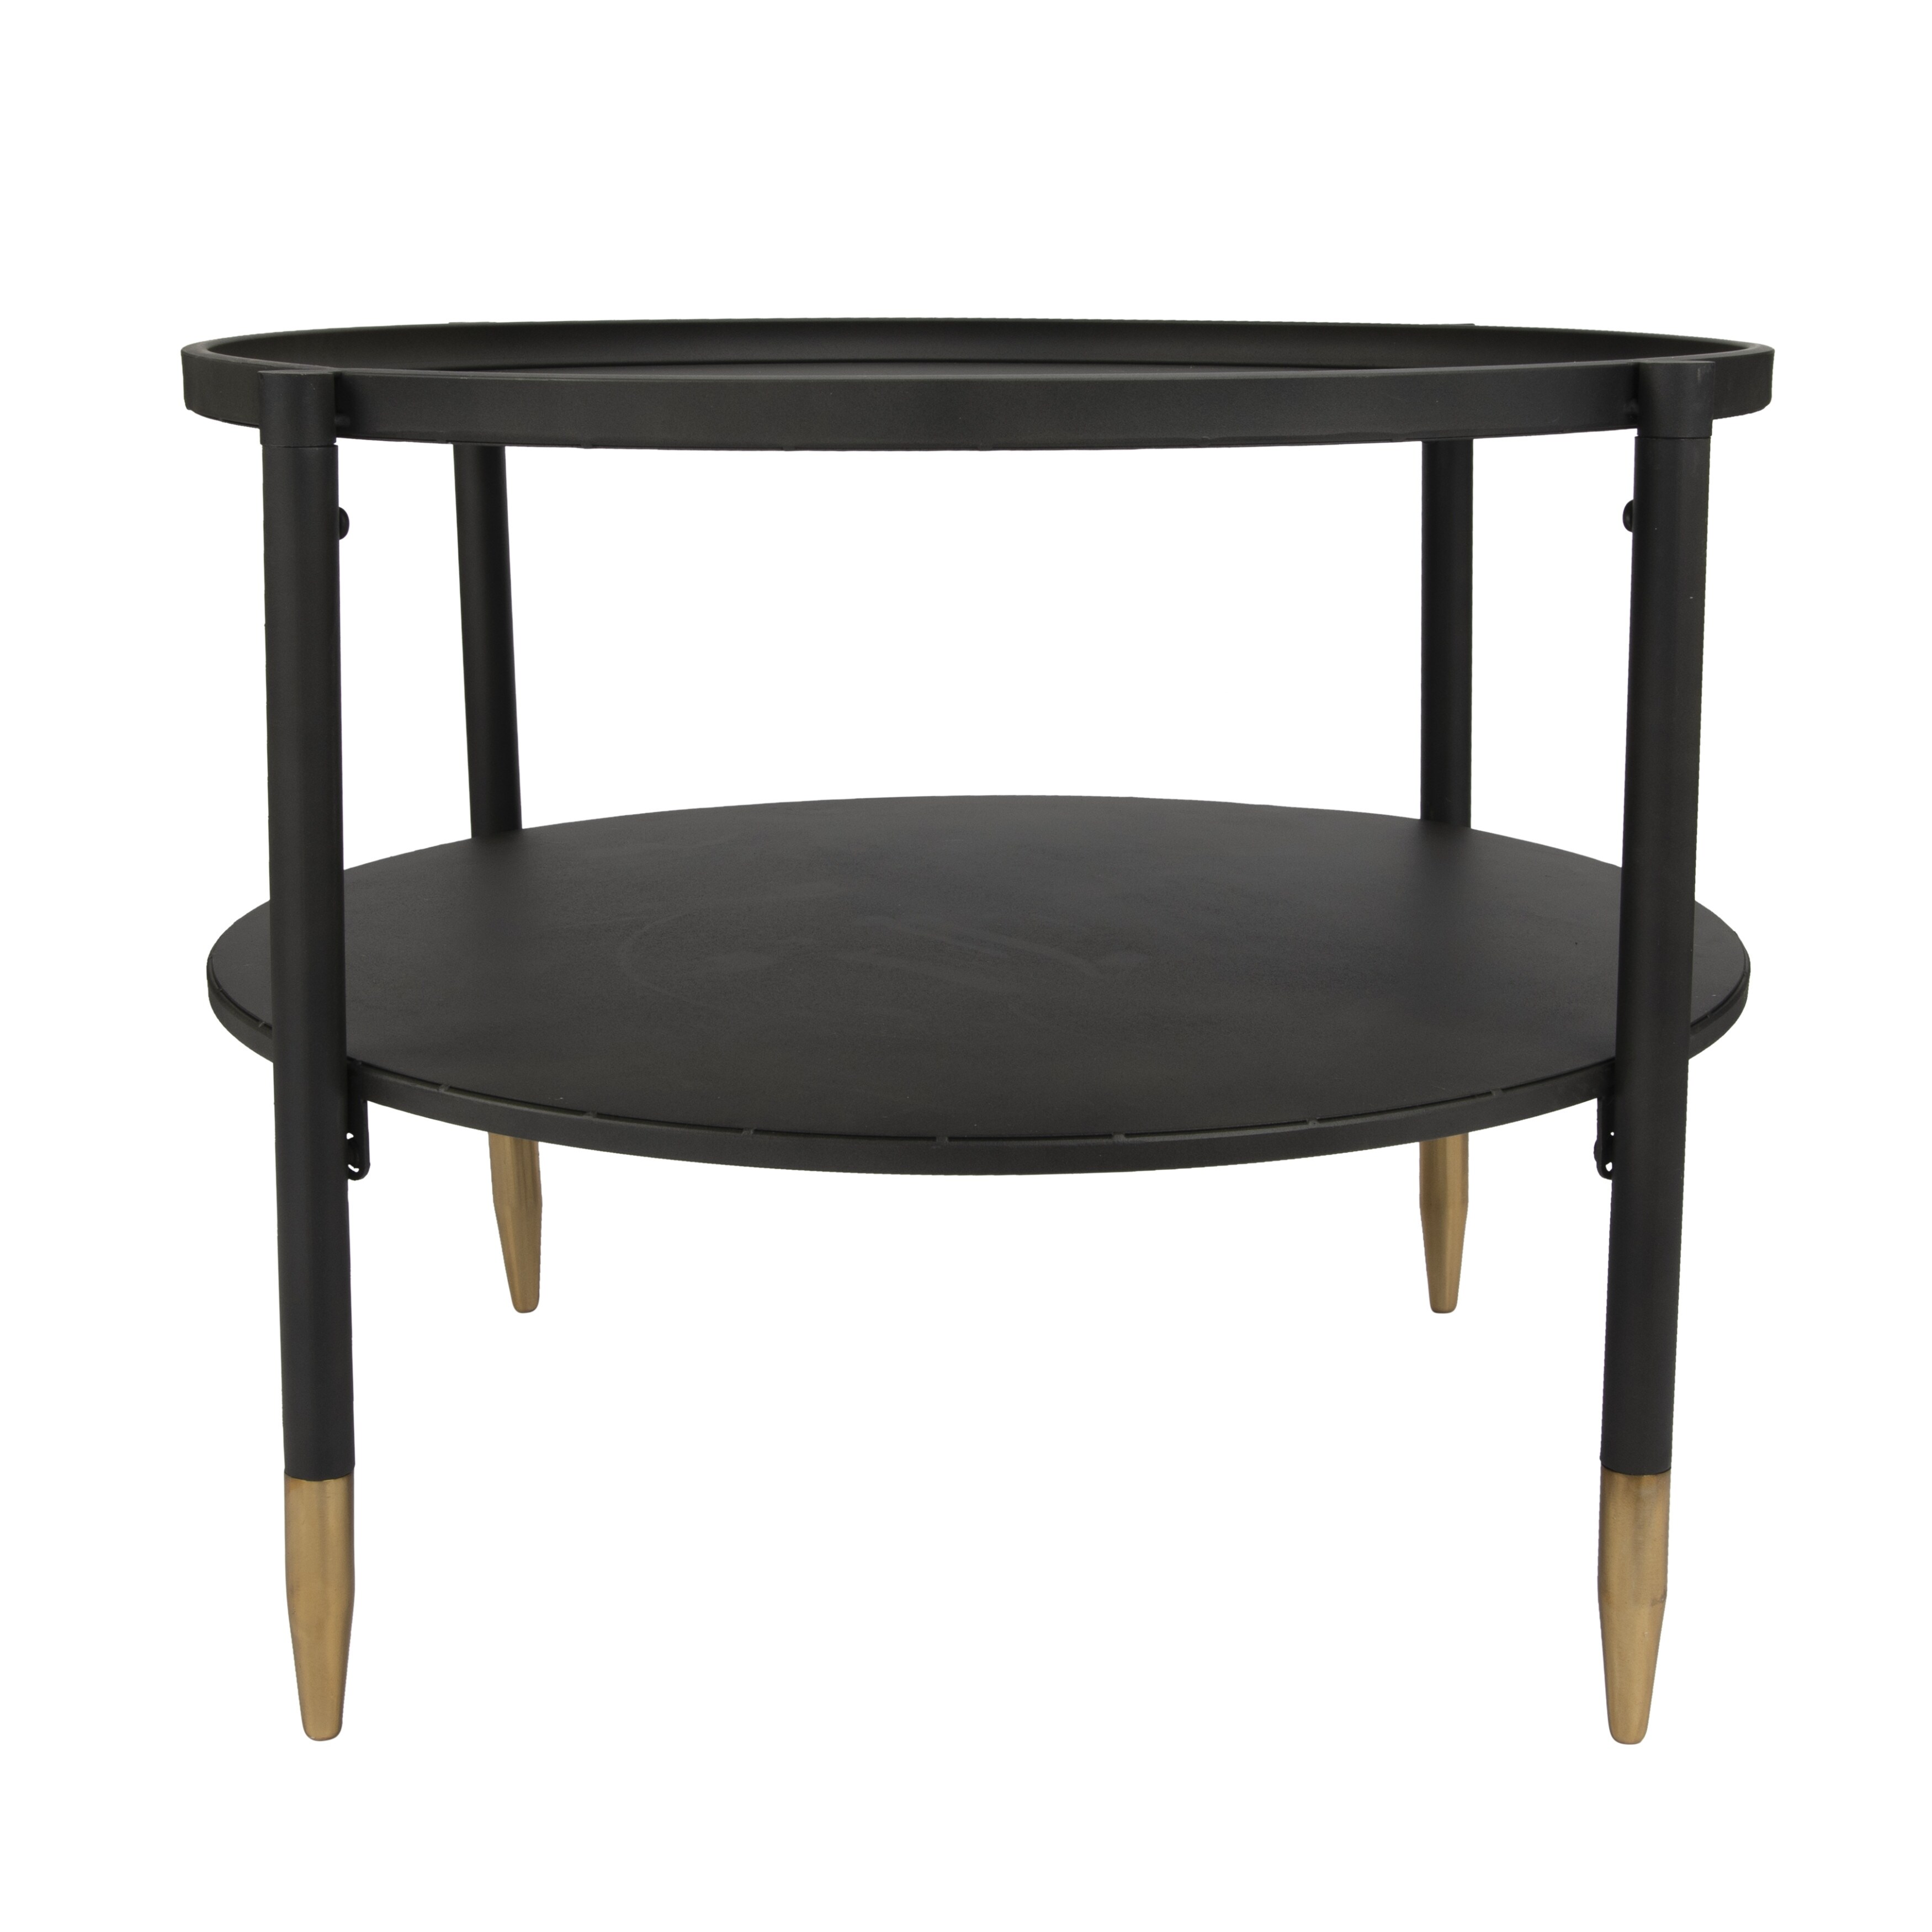 Round 2-Tier Black Metal Table with Gold Feet